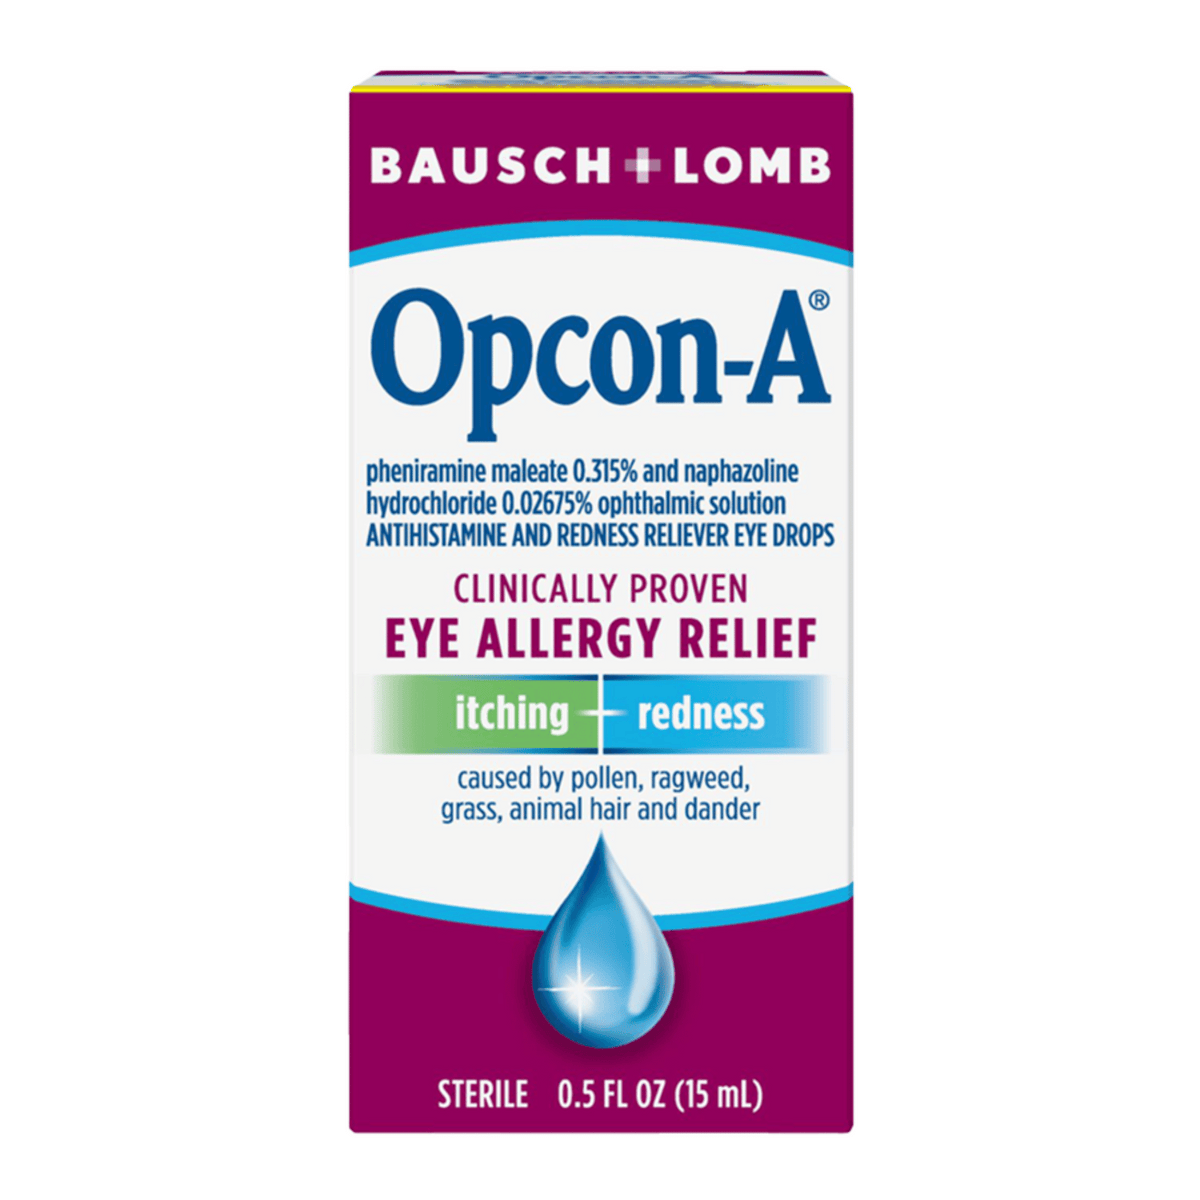 Primary Image of Opcon-A Eye Allergy Relief Drops